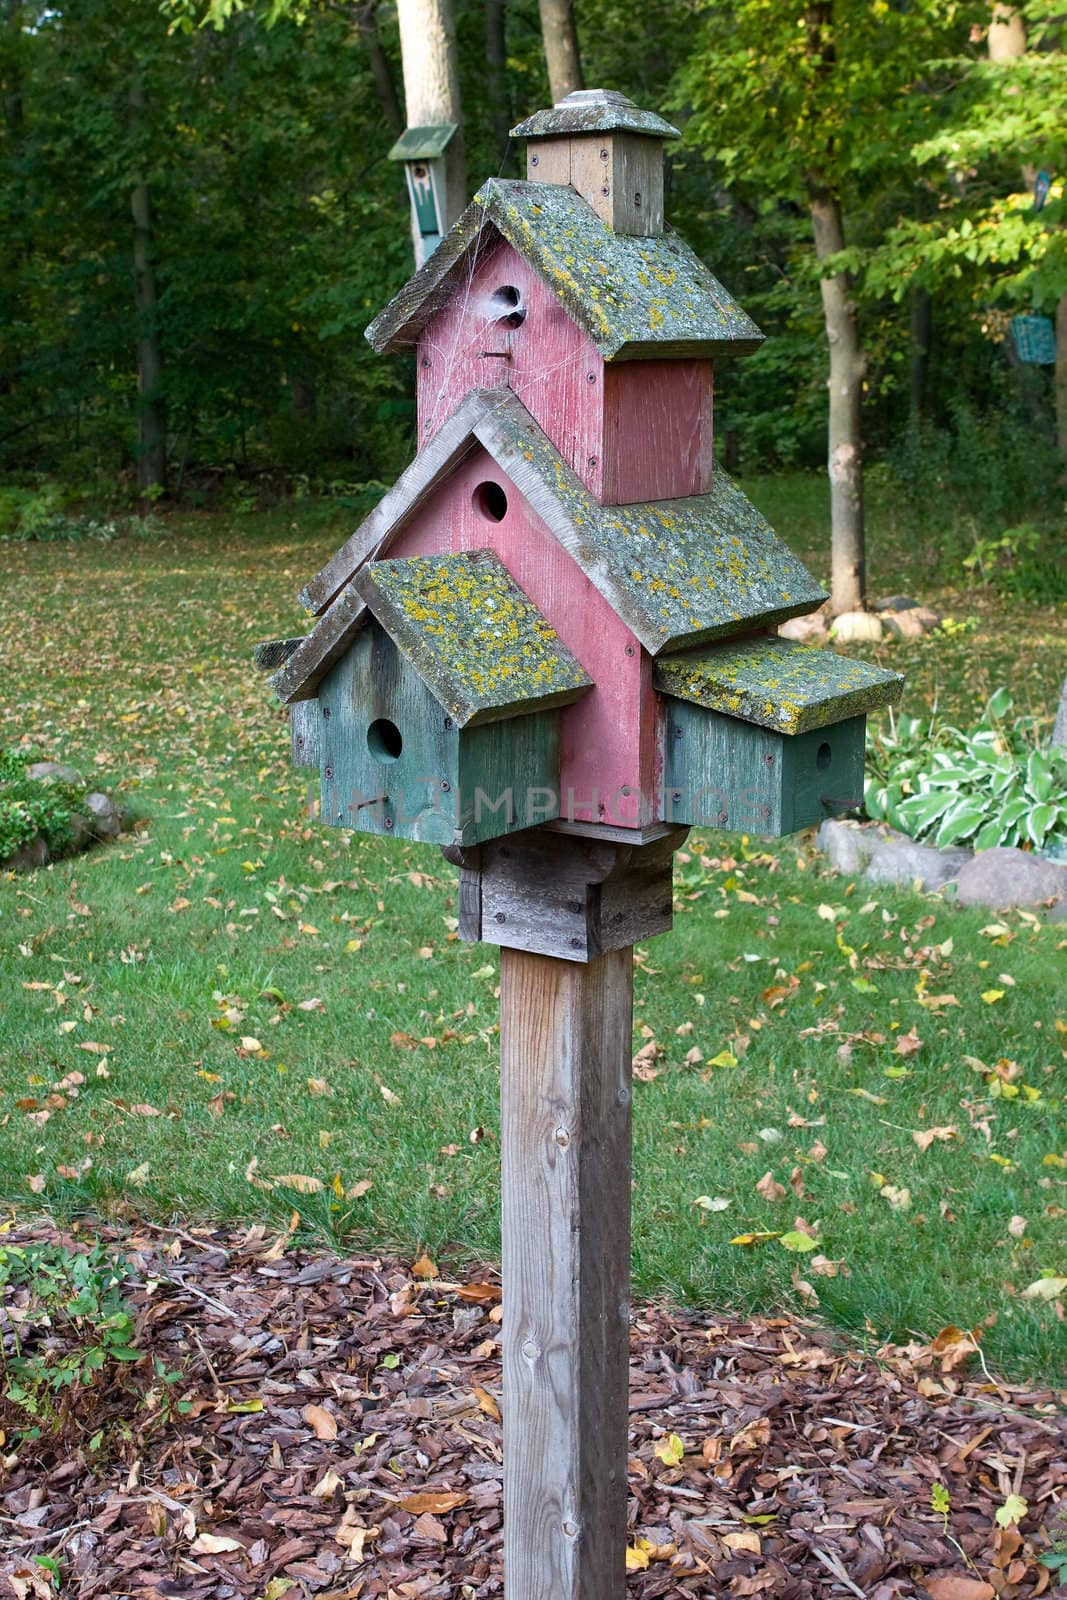 Abandoned Bird House by Coffee999